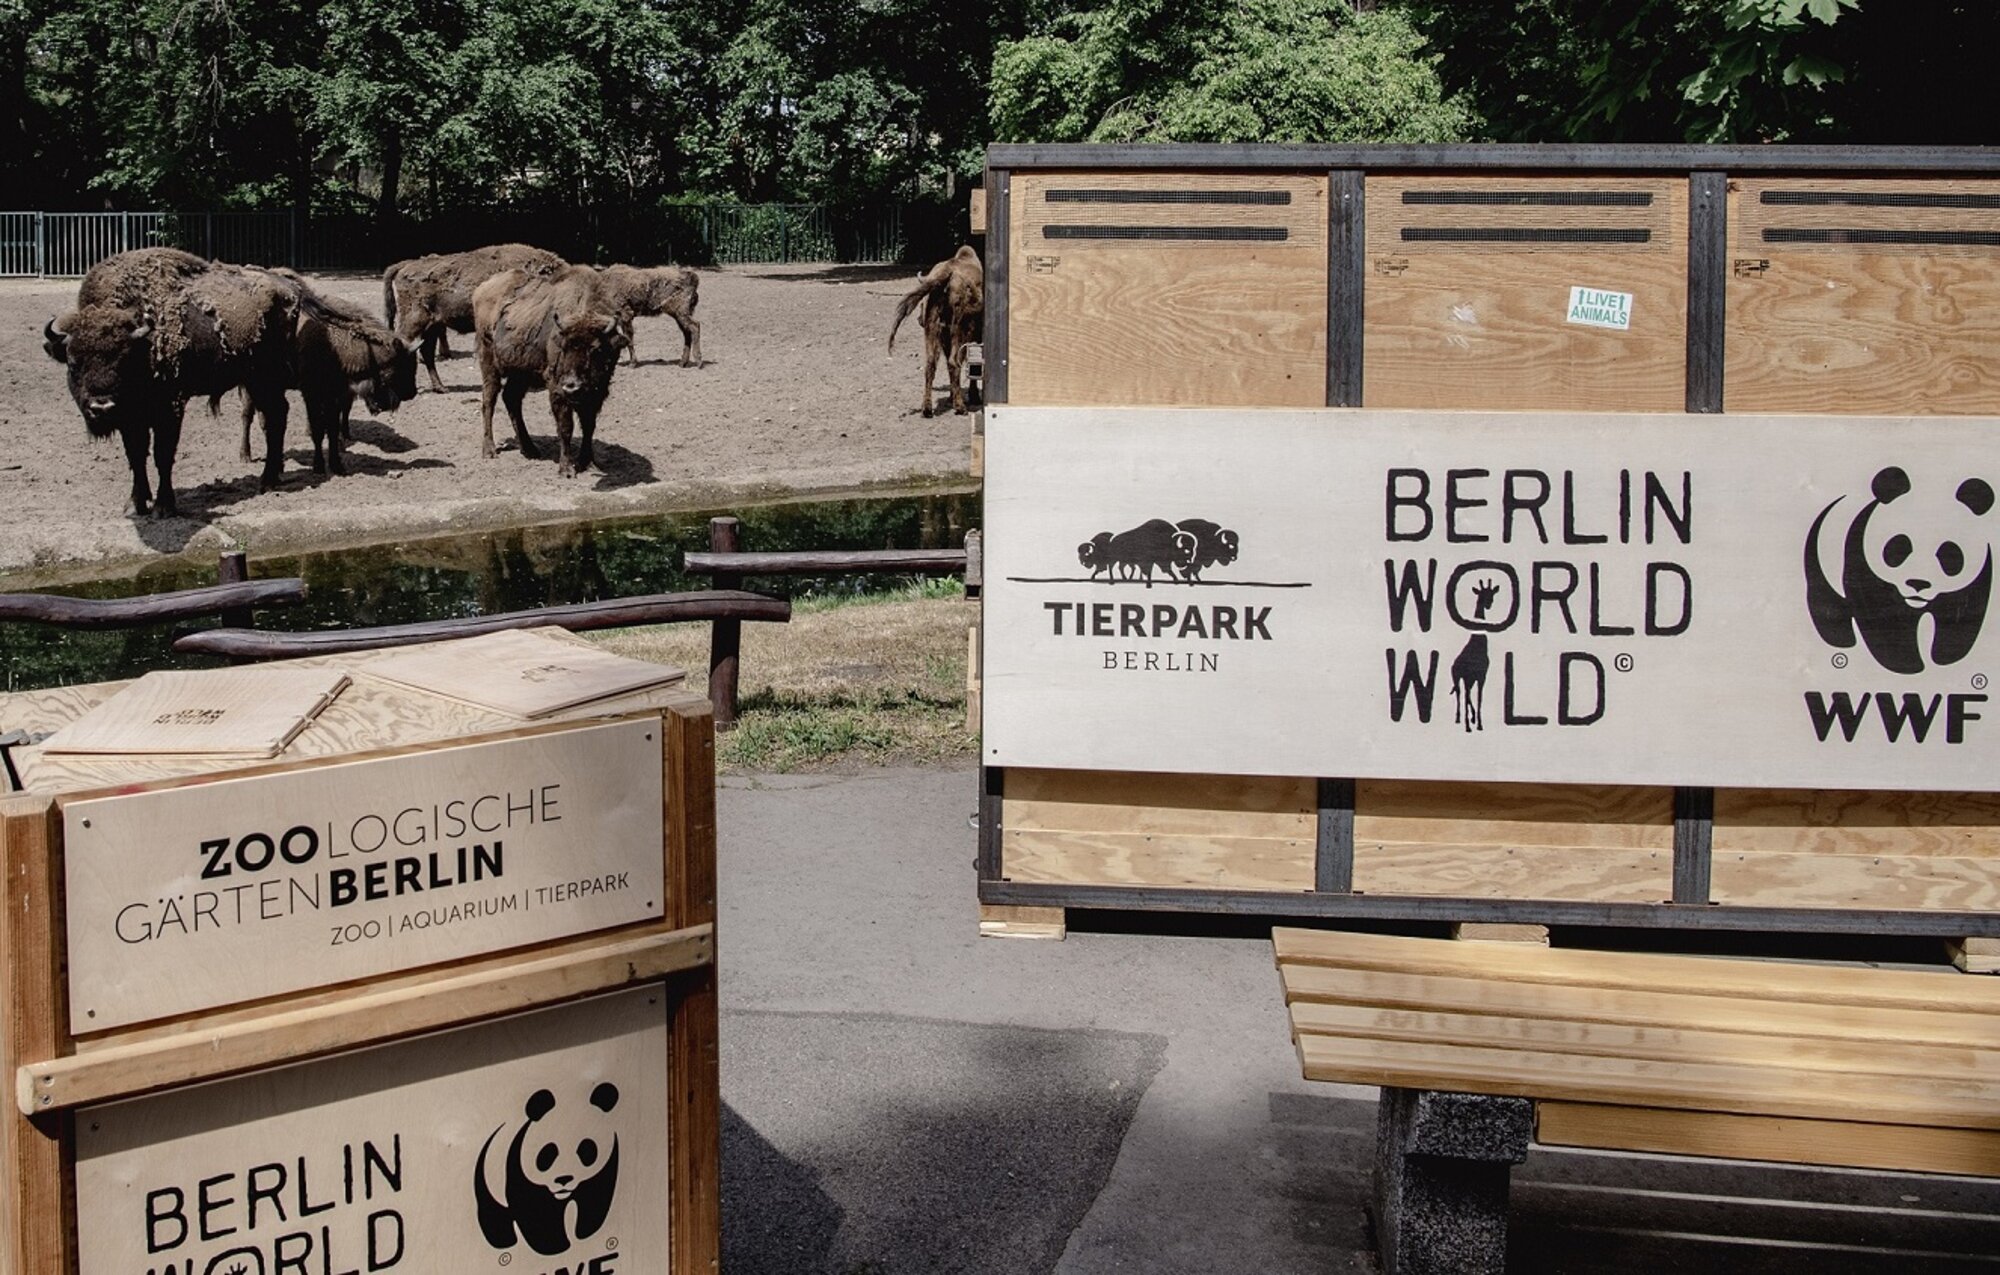 Working together to protect species – Zoo Berlin